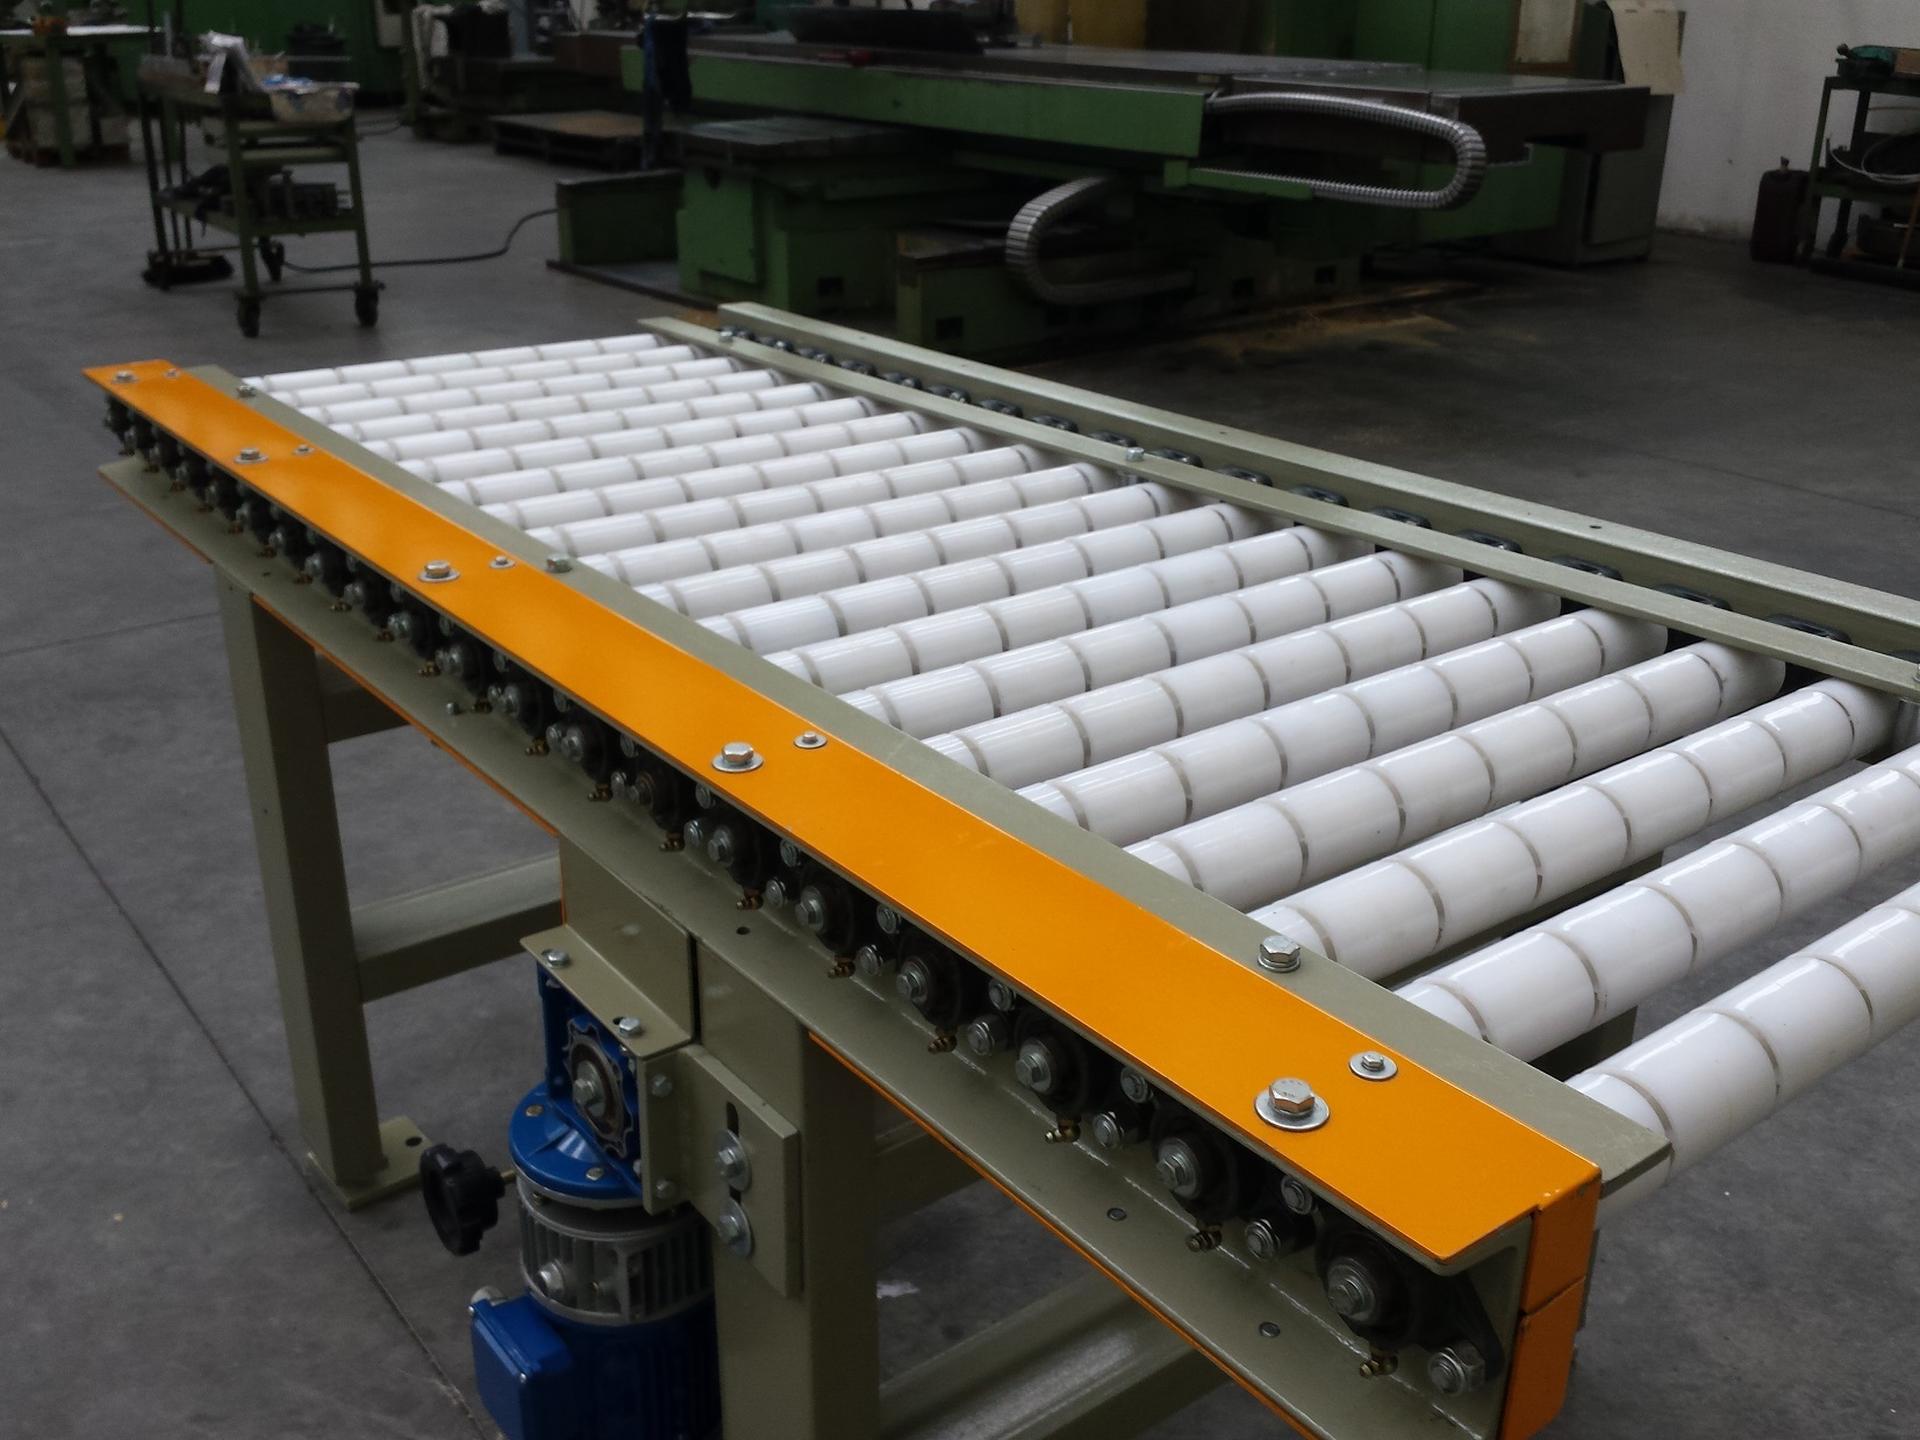 Industrial conveyors and material transportation systems